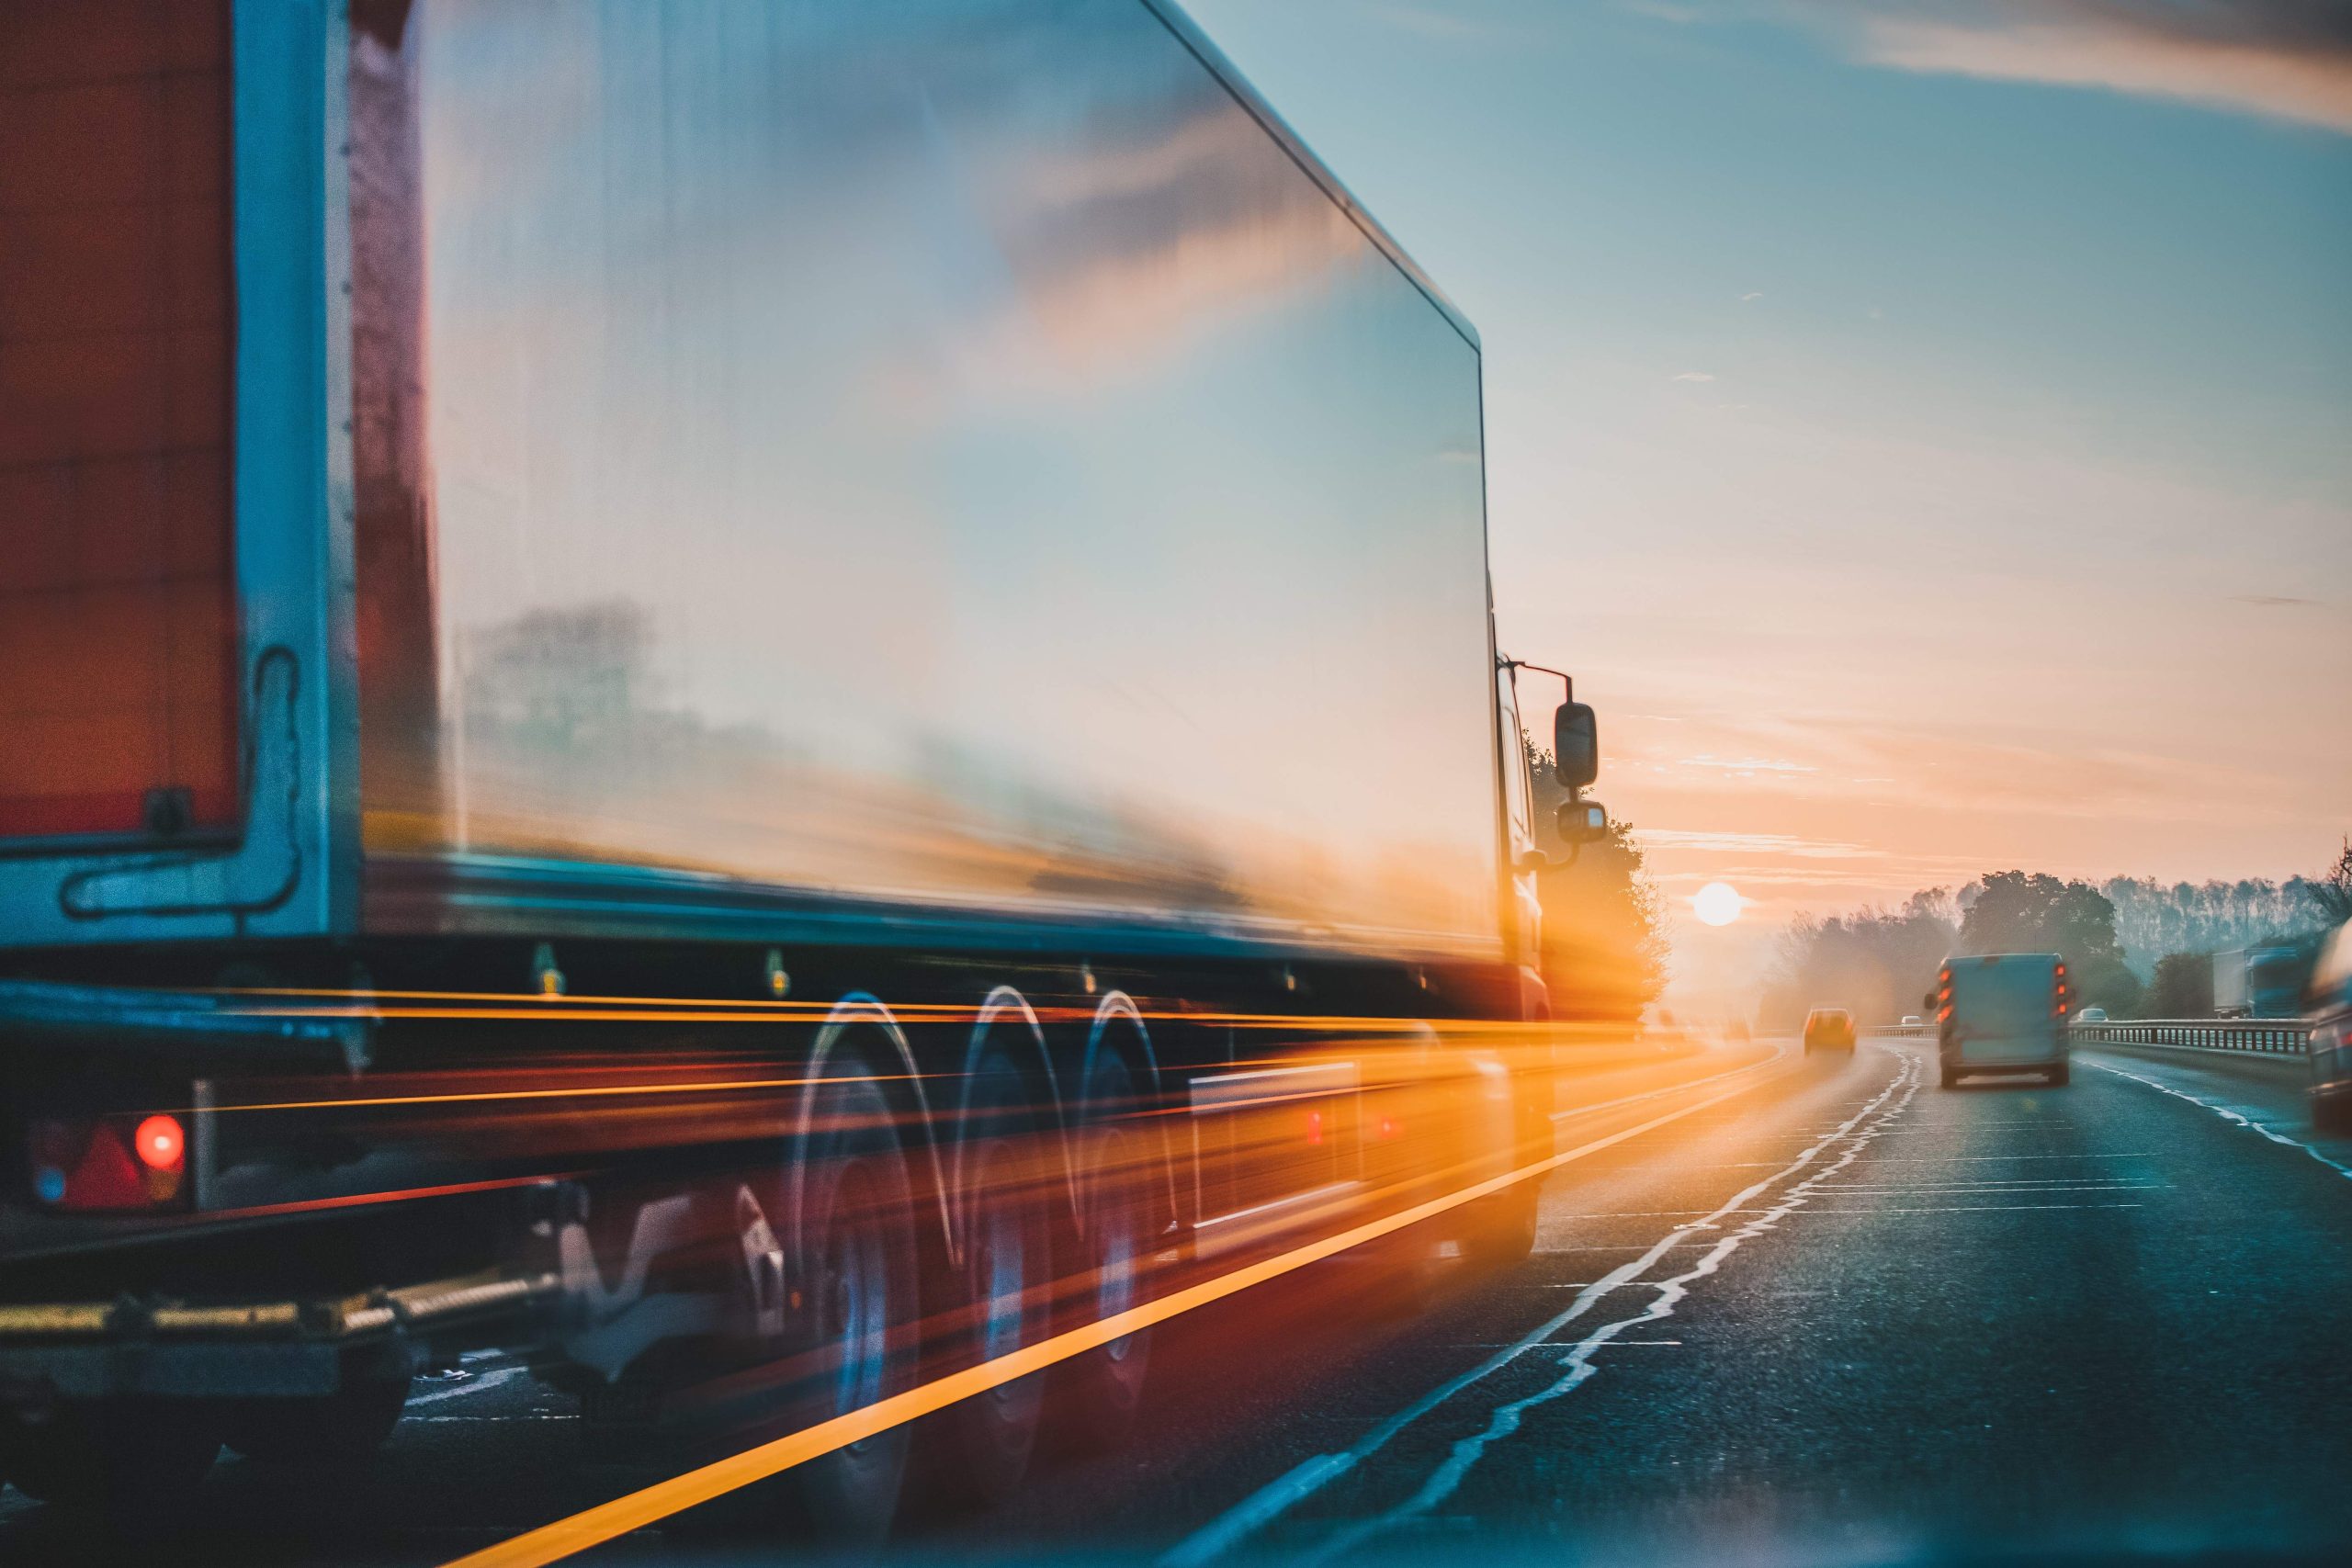 HGV Infrastructure Boost Needed to Reach Decarbonisation Targets